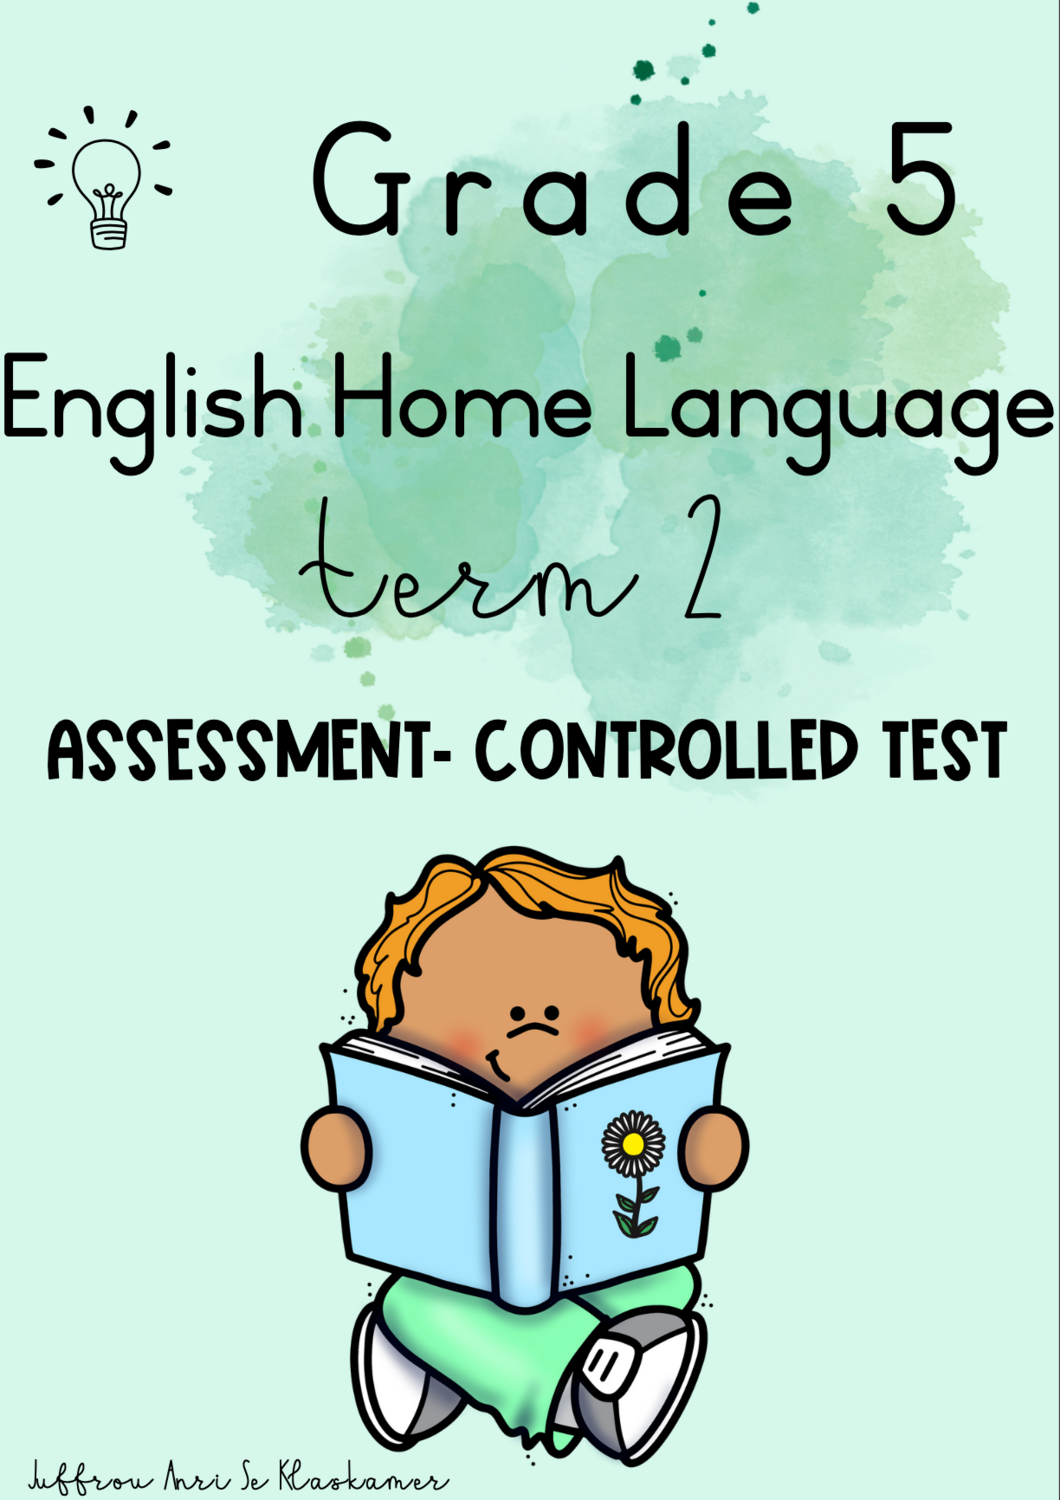 Grade 5 English Home Language term 2 assessment- controlled test (2023)